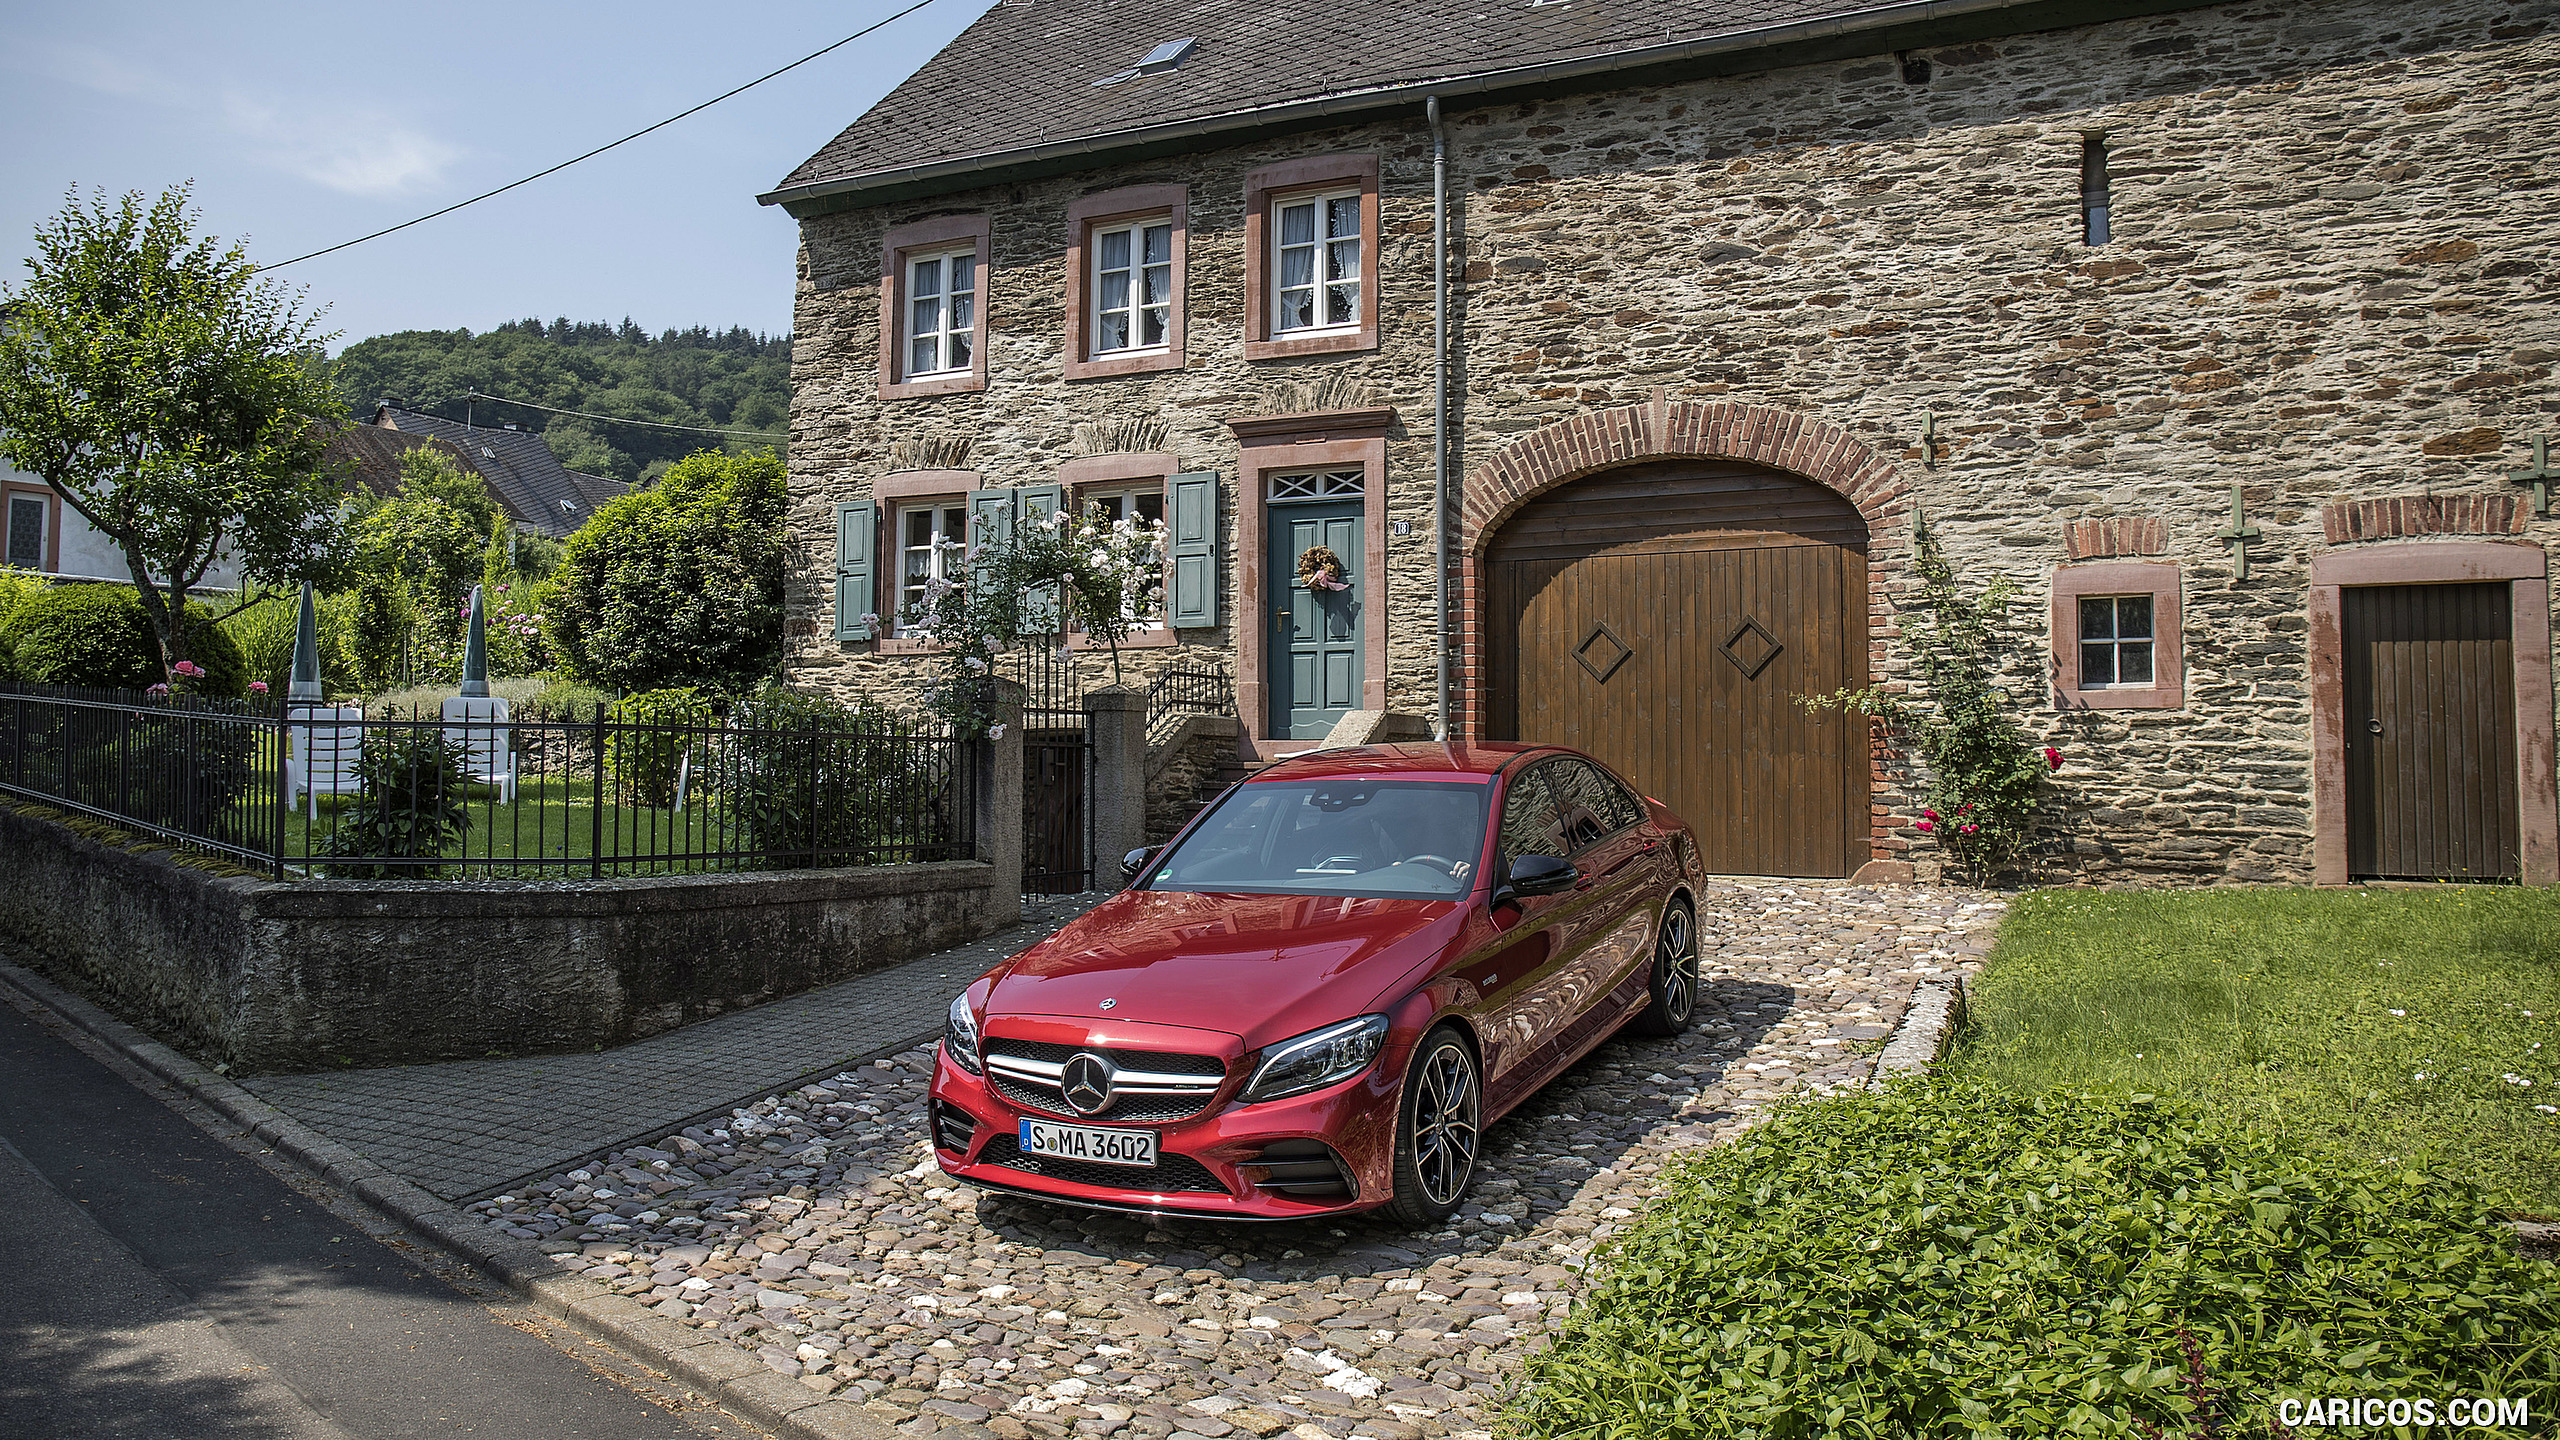 2019 Mercedes-AMG C43 4MATIC Sedan (Color: Hyacinth Red) - Front Three-Quarter, #60 of 192